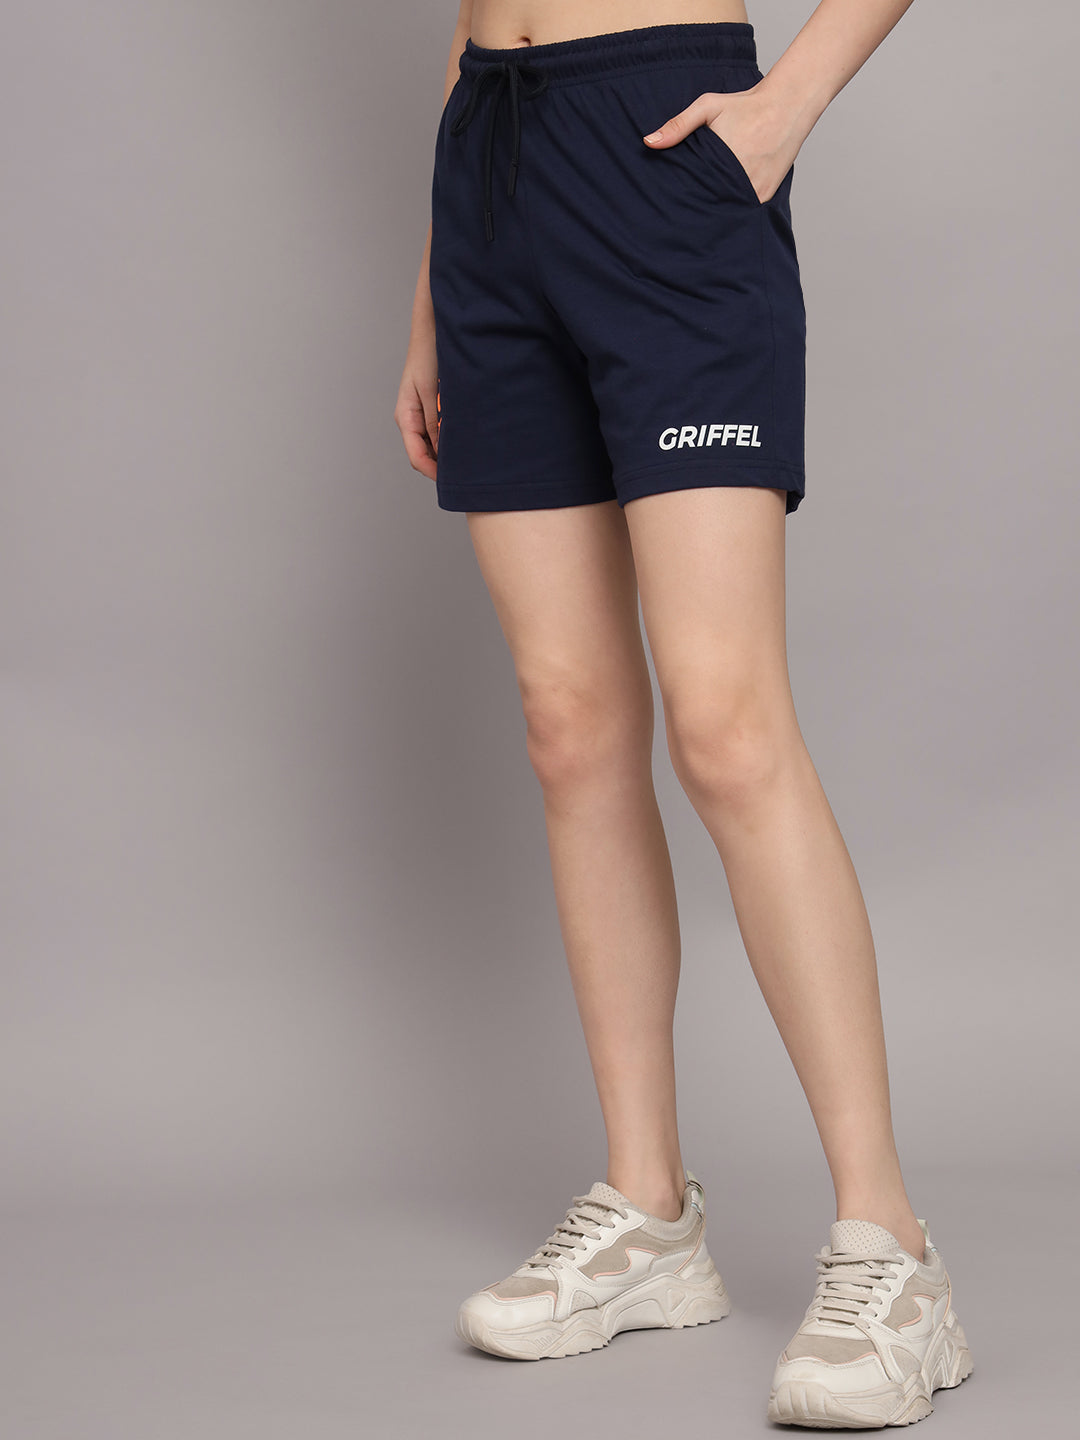 GRIFFEL Women Placement Print Oversized Loose fit Navy Short - griffel